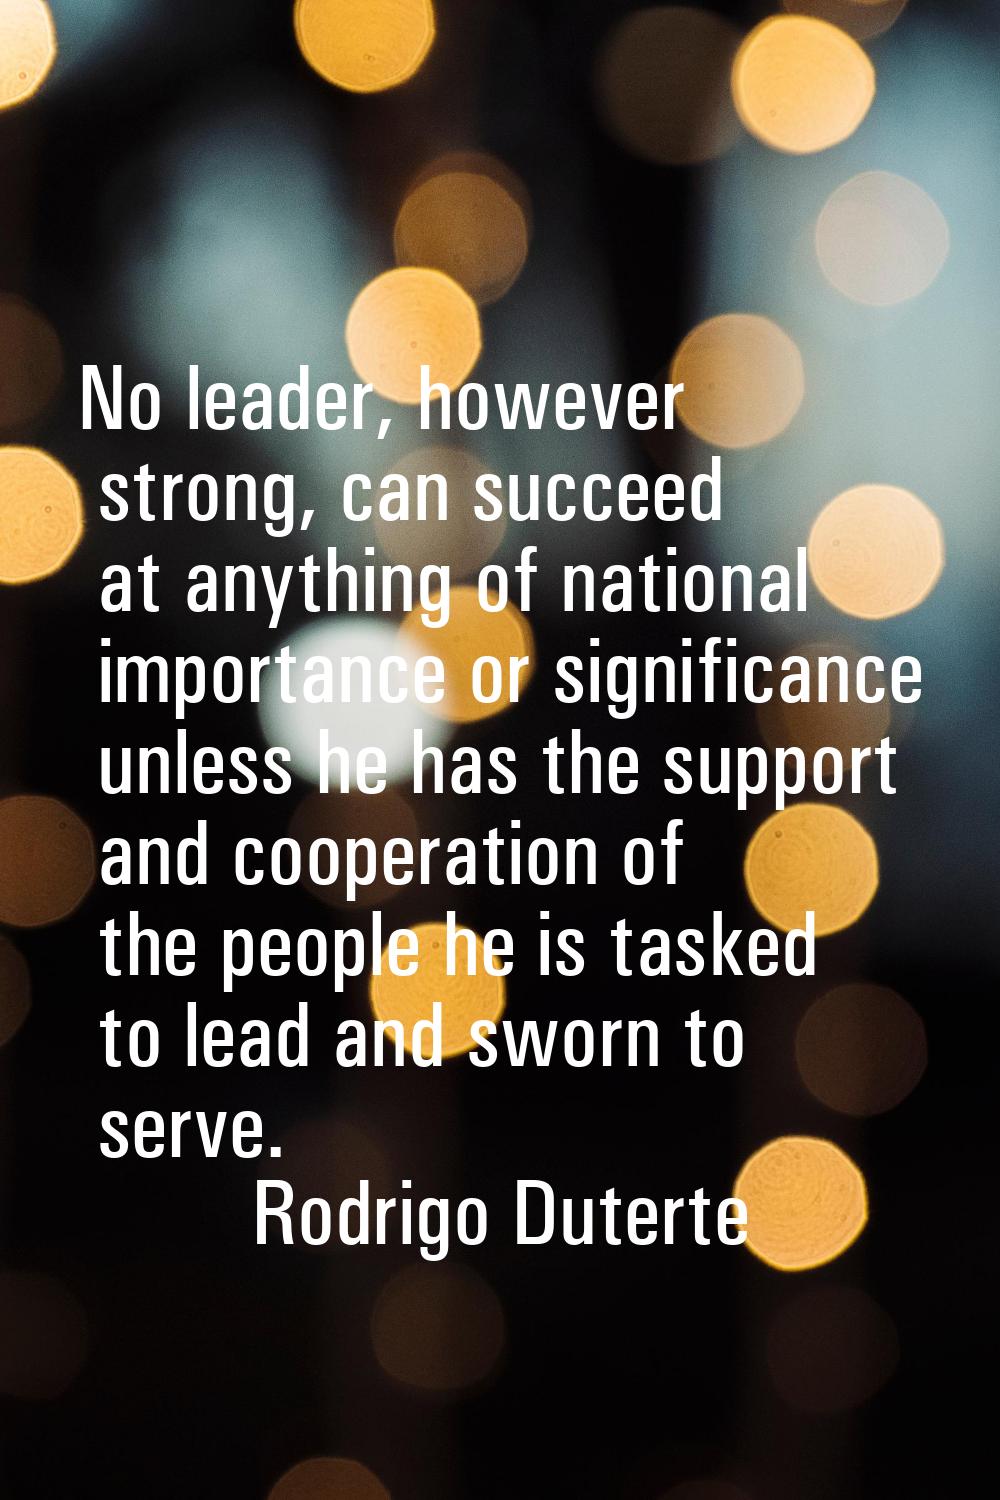 No leader, however strong, can succeed at anything of national importance or significance unless he